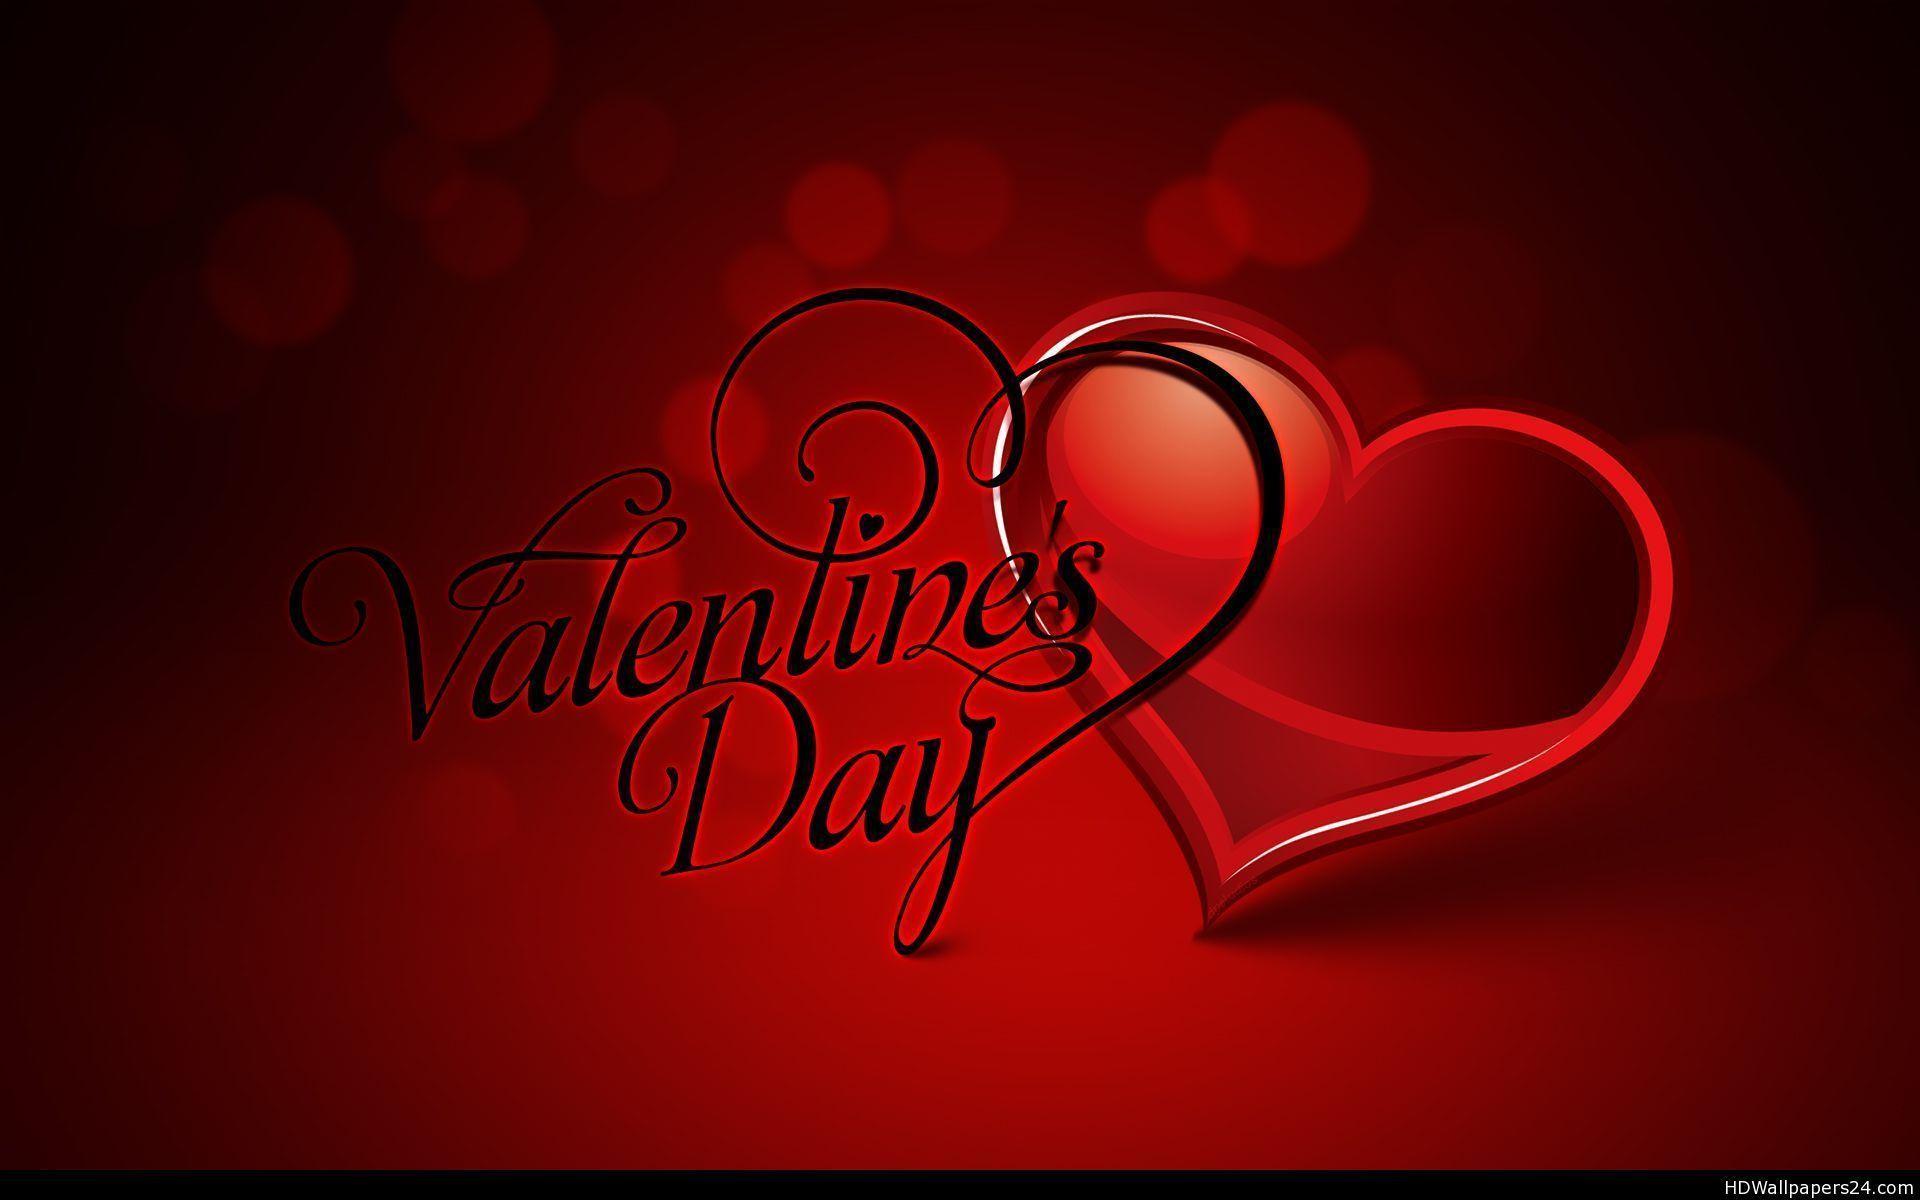 Wallpaper for Gt Happy Valentines Day Wallpaper 1920x1200PX